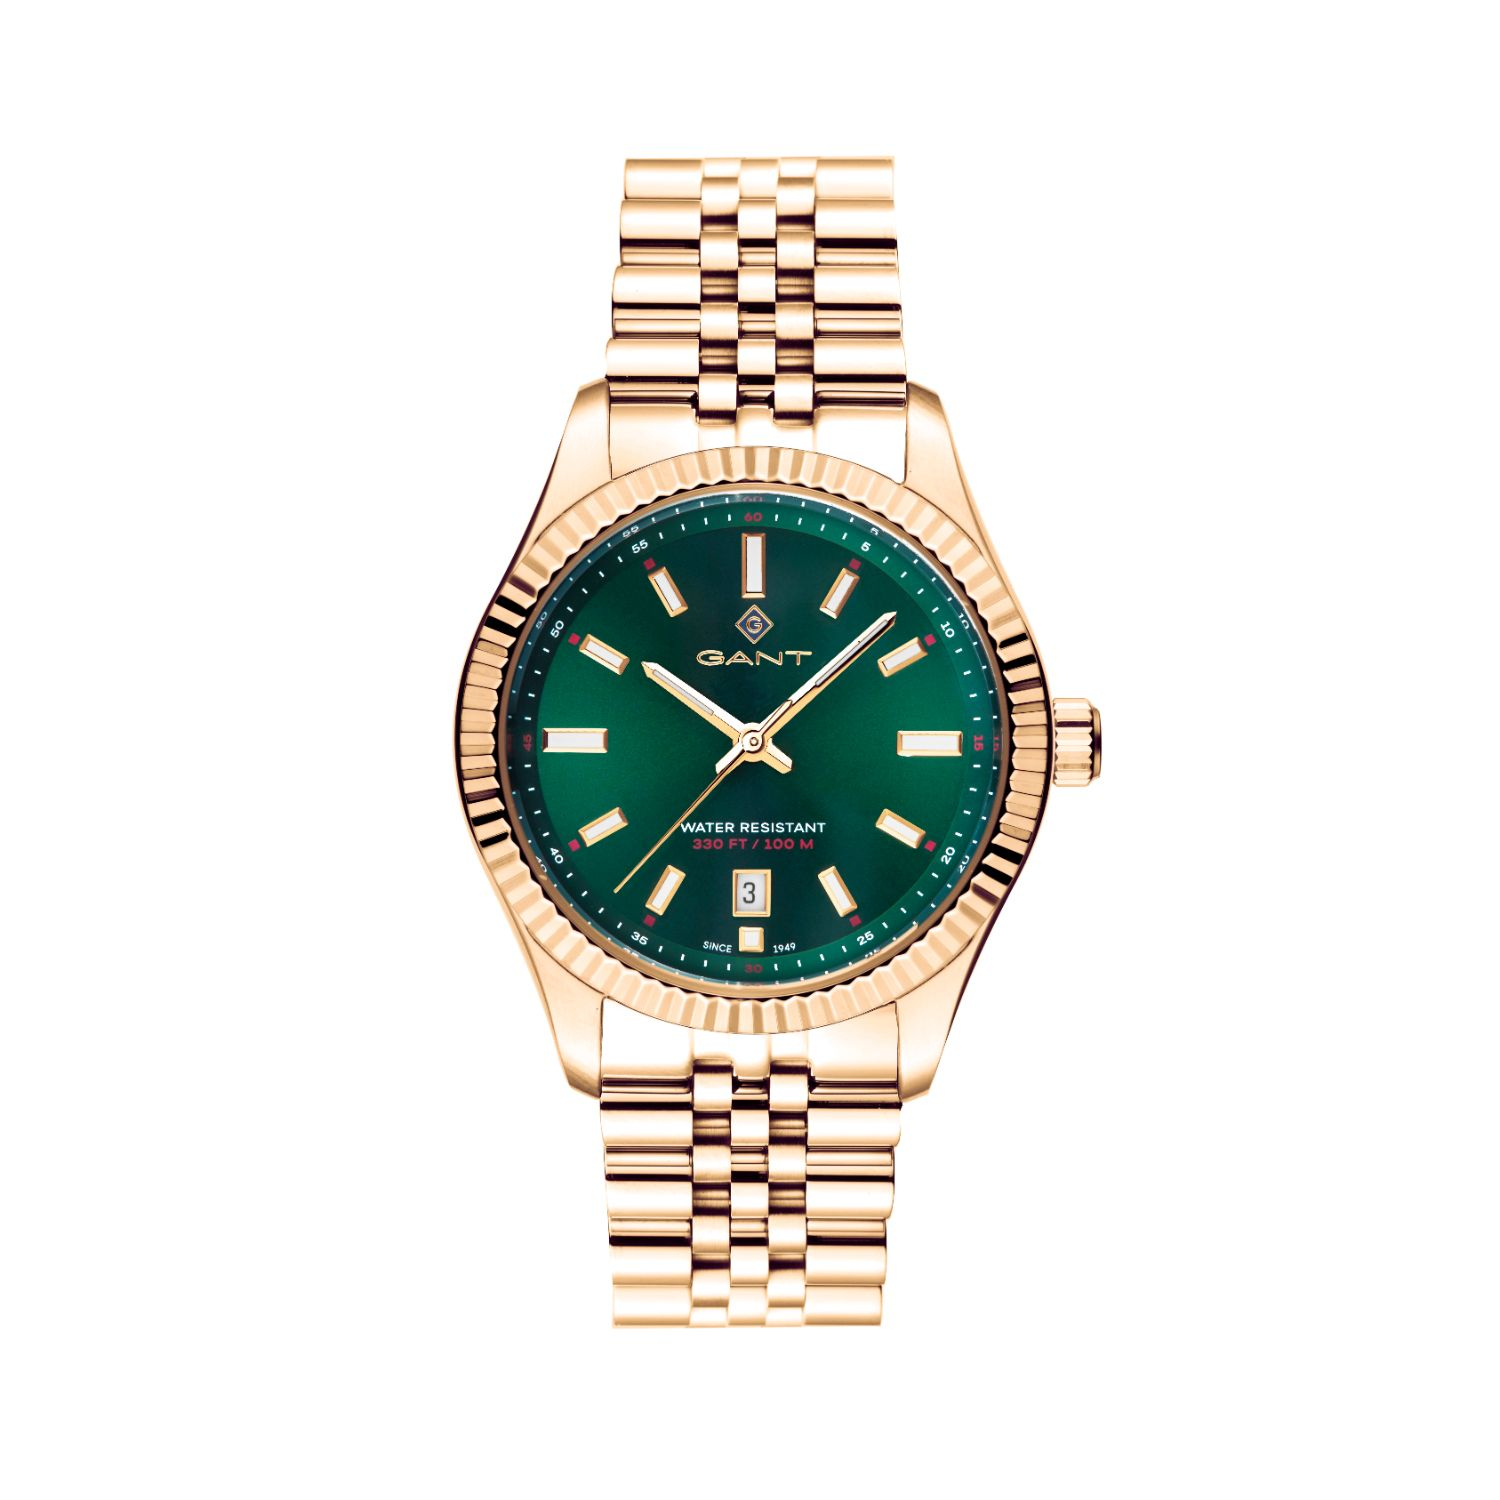 Womens Gant watch in gold stainless steel with green dial and bracelet.